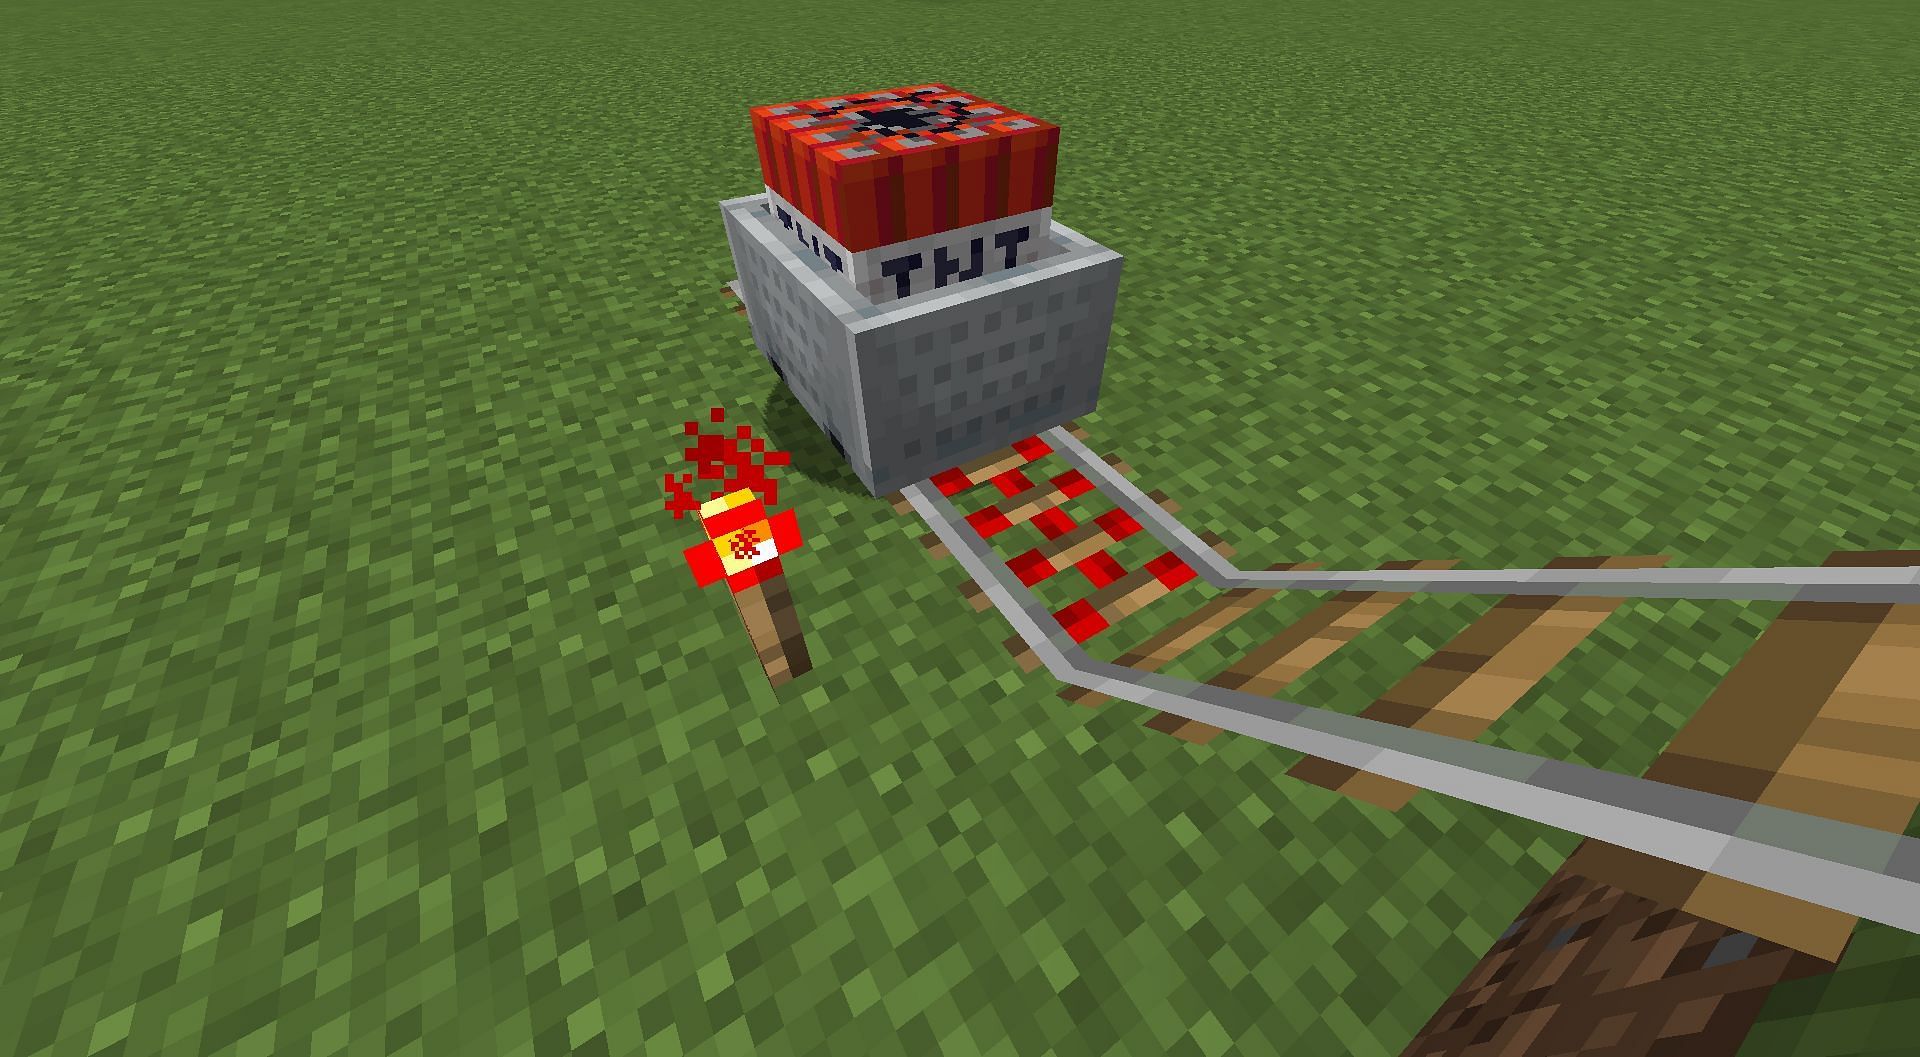 Activator rail can activate the content in the minecart itself (Image via Mojang)